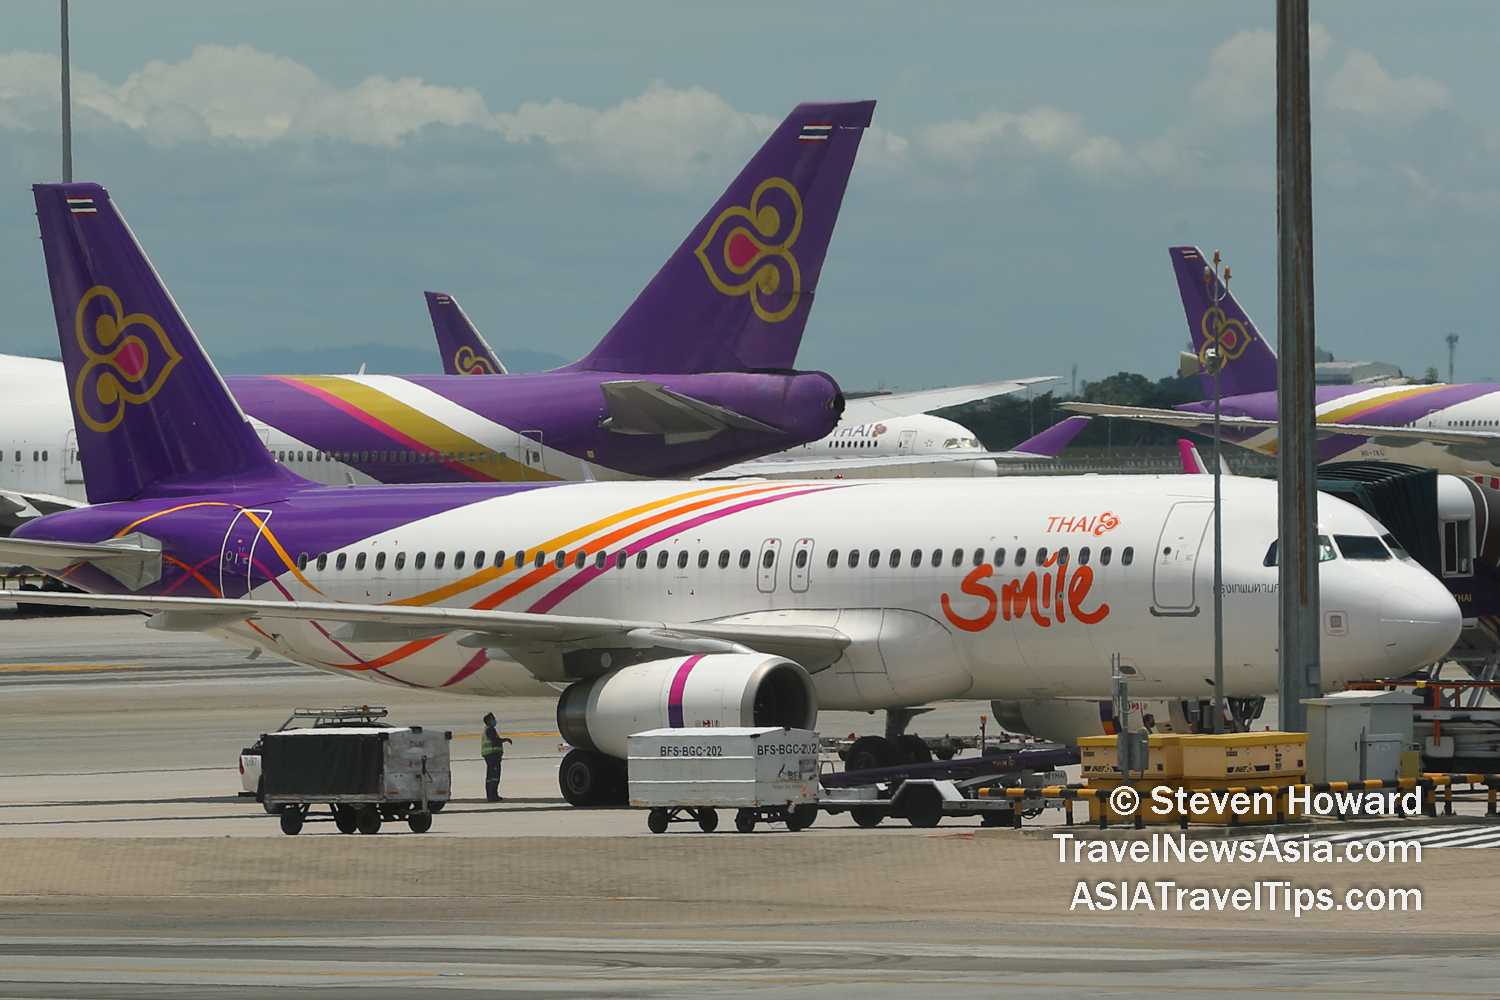 Thai Airways and Thai Smile aircraft at Suvarnabhumi Int. Airport (BKK) near Bangkok, Thailand. Picture by Steven Howard of TravelNewsAsia.com Click to enlarge.